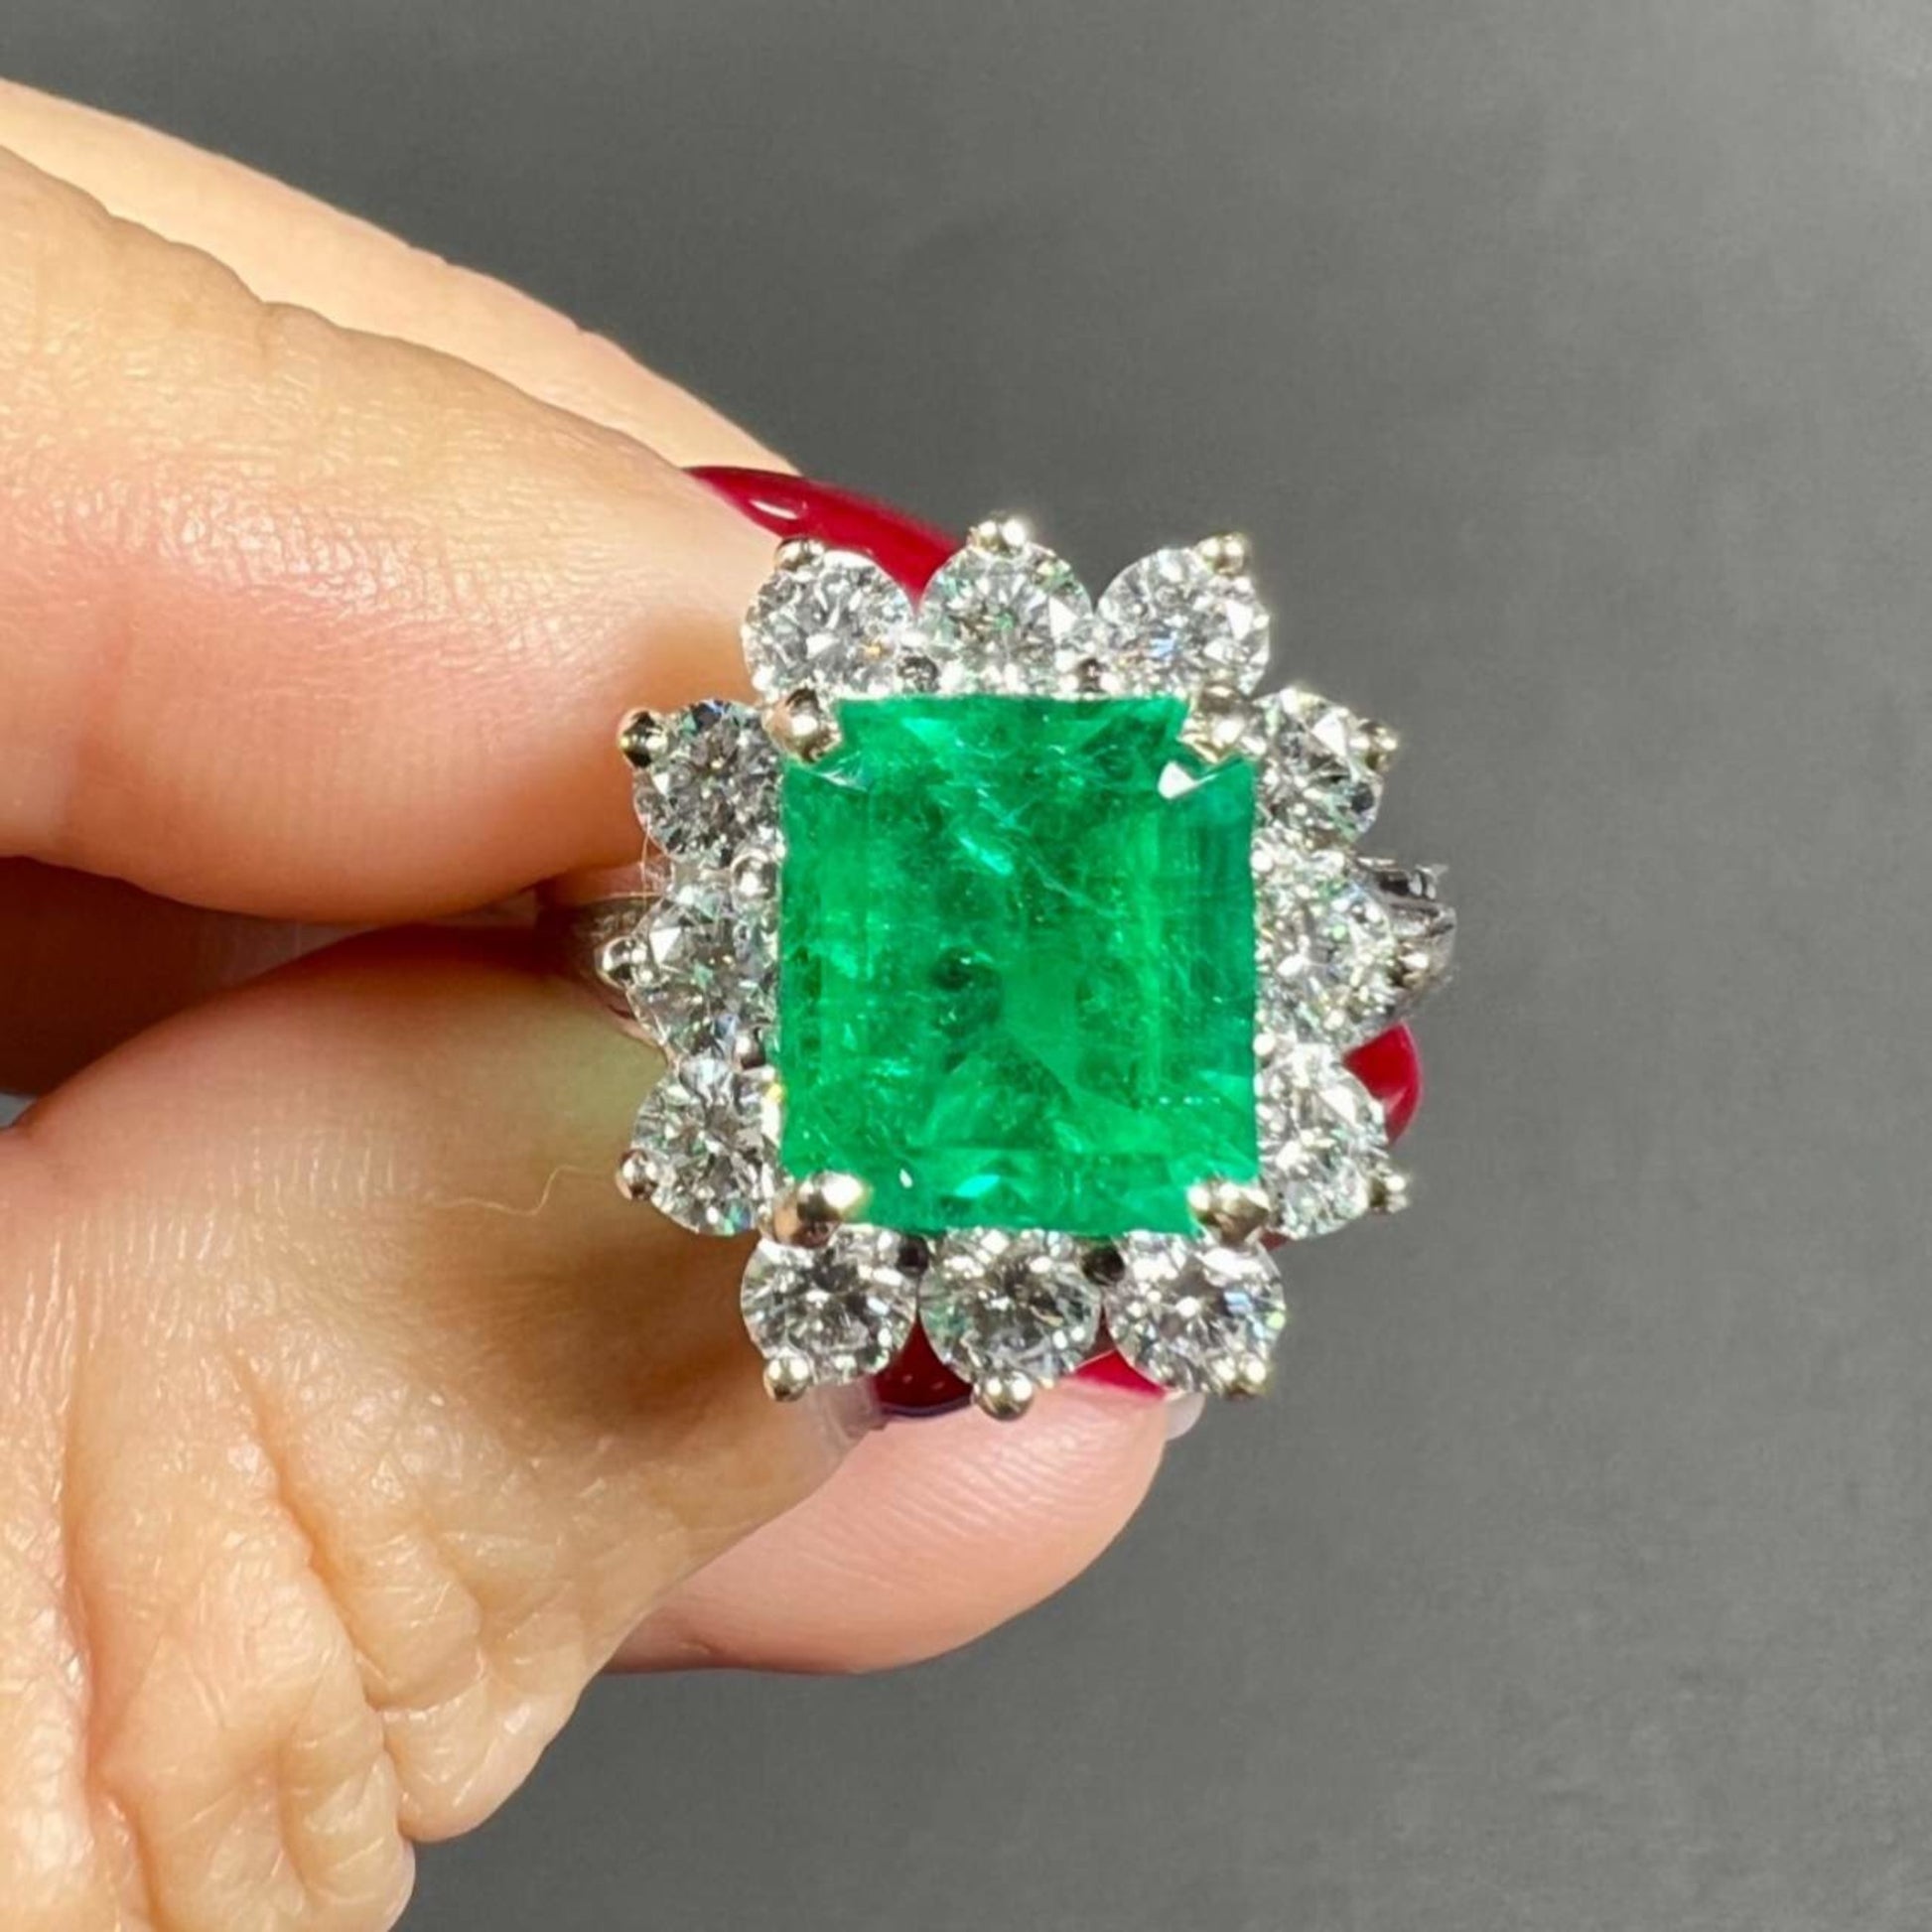 Post-1980s 14KT White Gold Emerald & Diamond Ring front